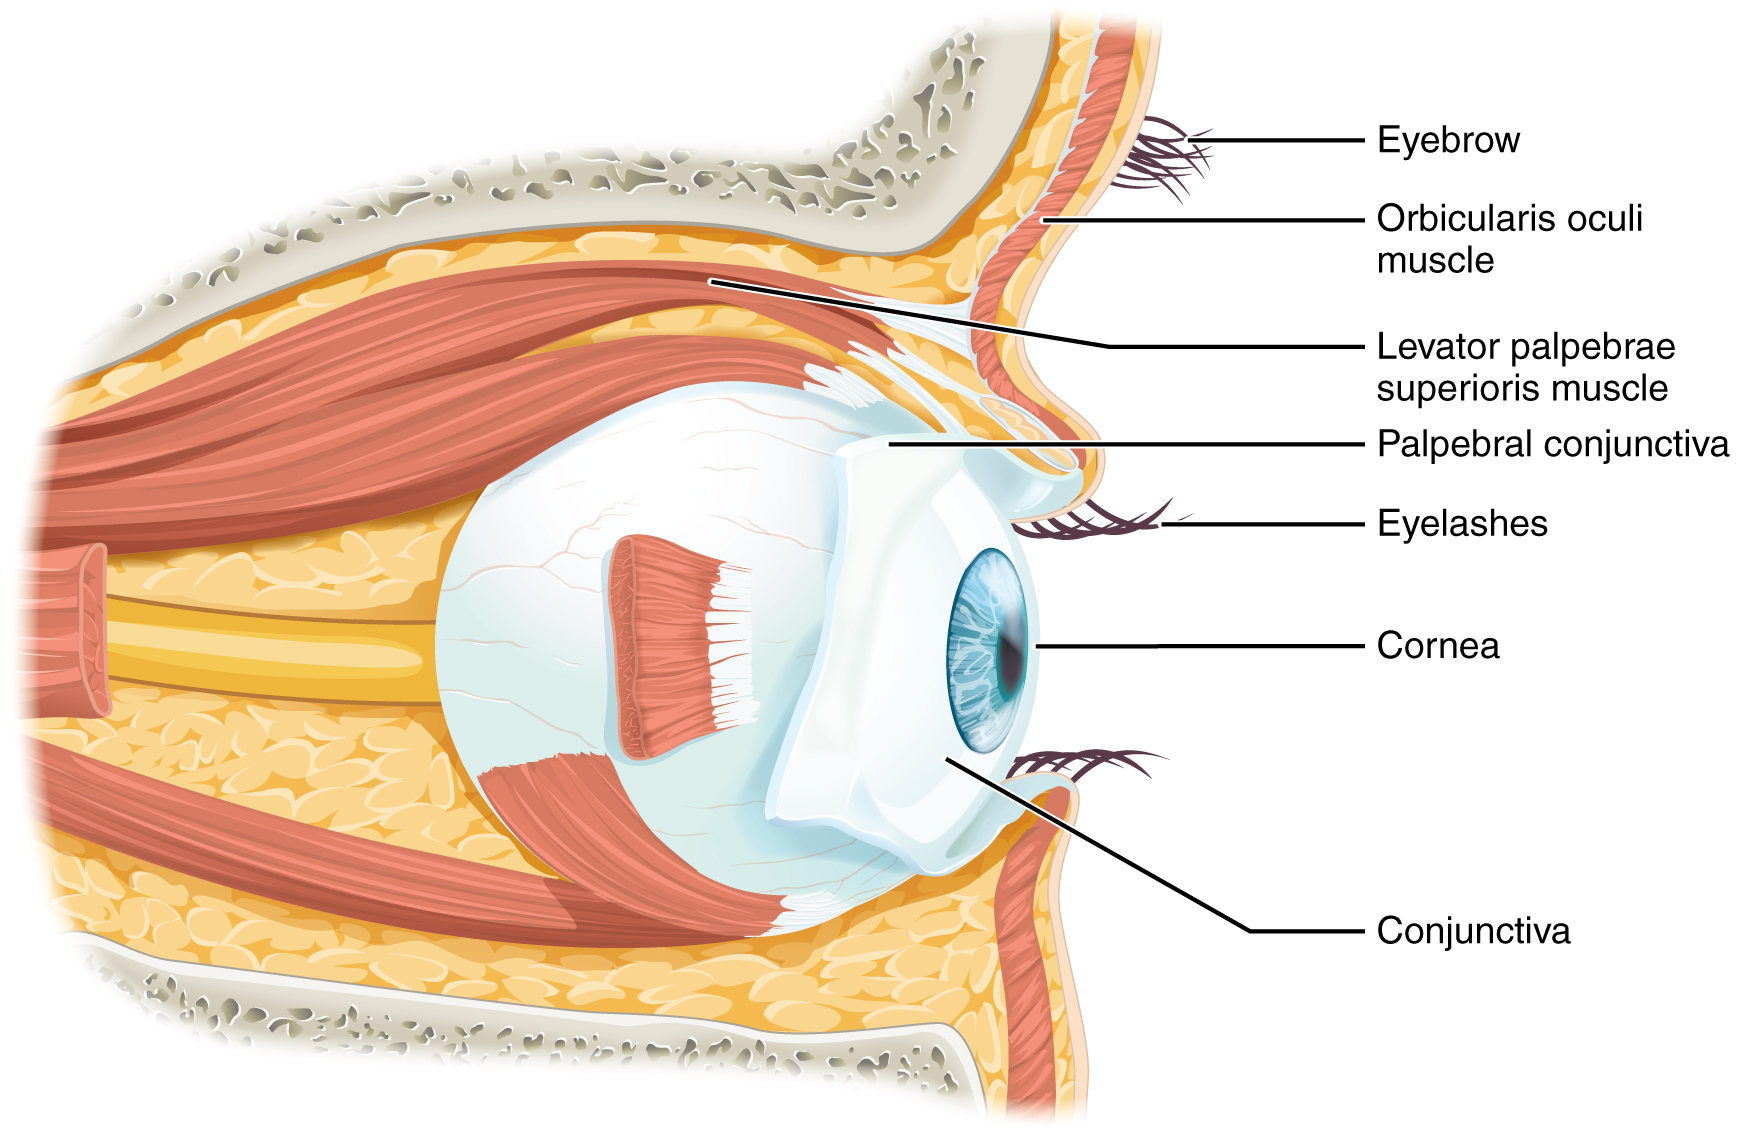 This diagram shows the lateral view of the eye. The major parts are labeled. Labels read (from top): eye brow, orbicularis oculi muscle, levator palpebrae superioris muscle, palpebral conjuctiva, eyelashes, cornea, cojunctiva.